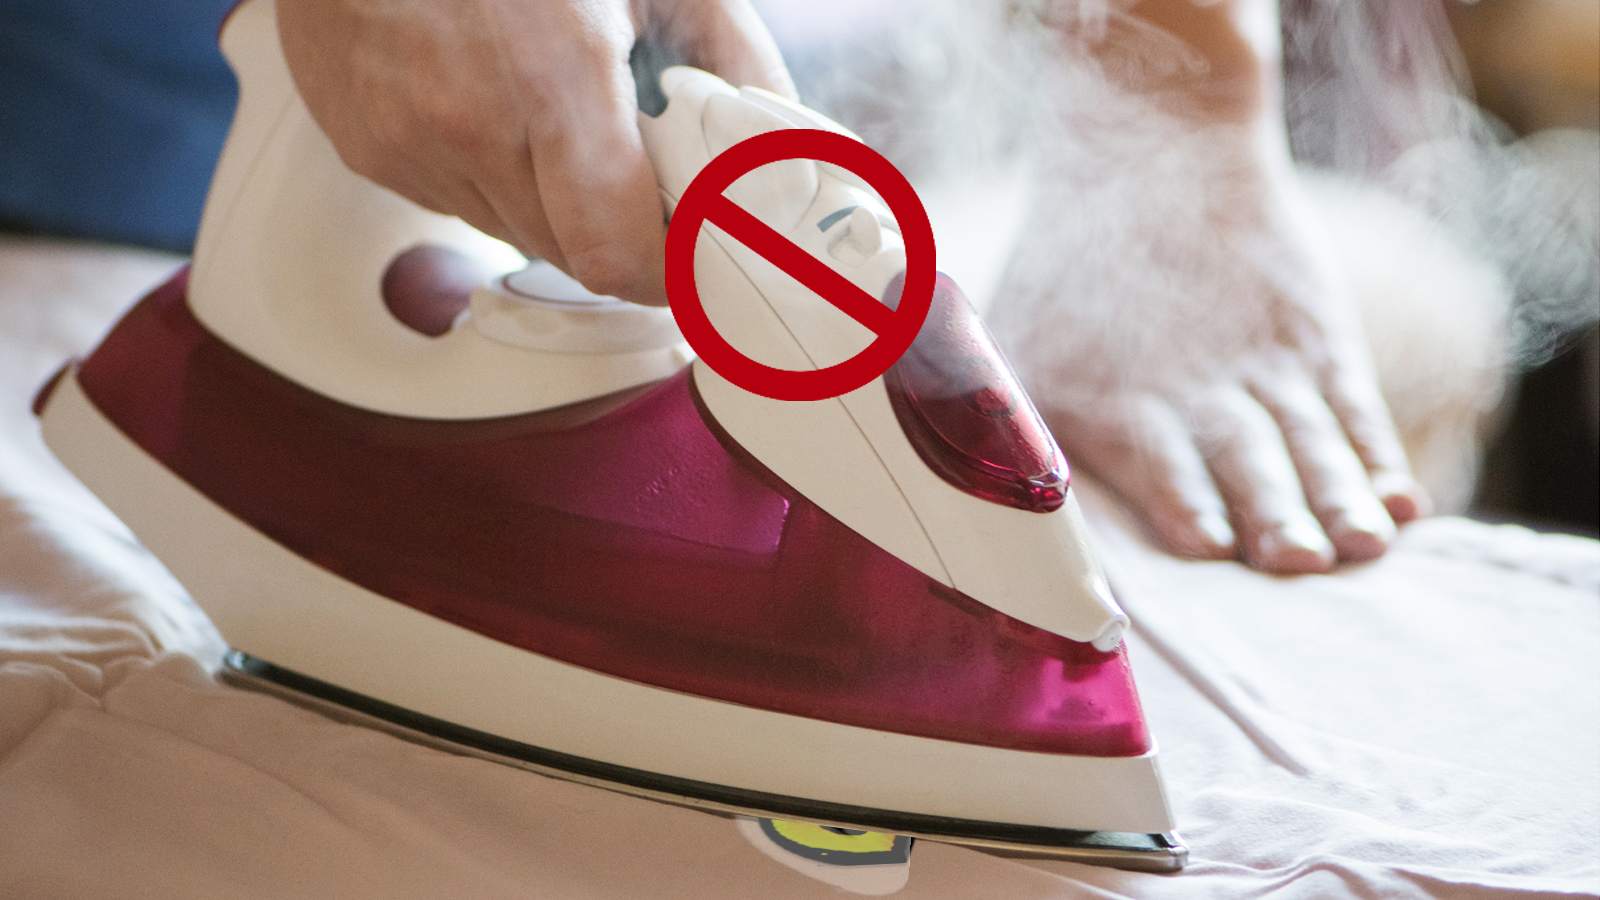 A person ironing a bed with a no steam sign.